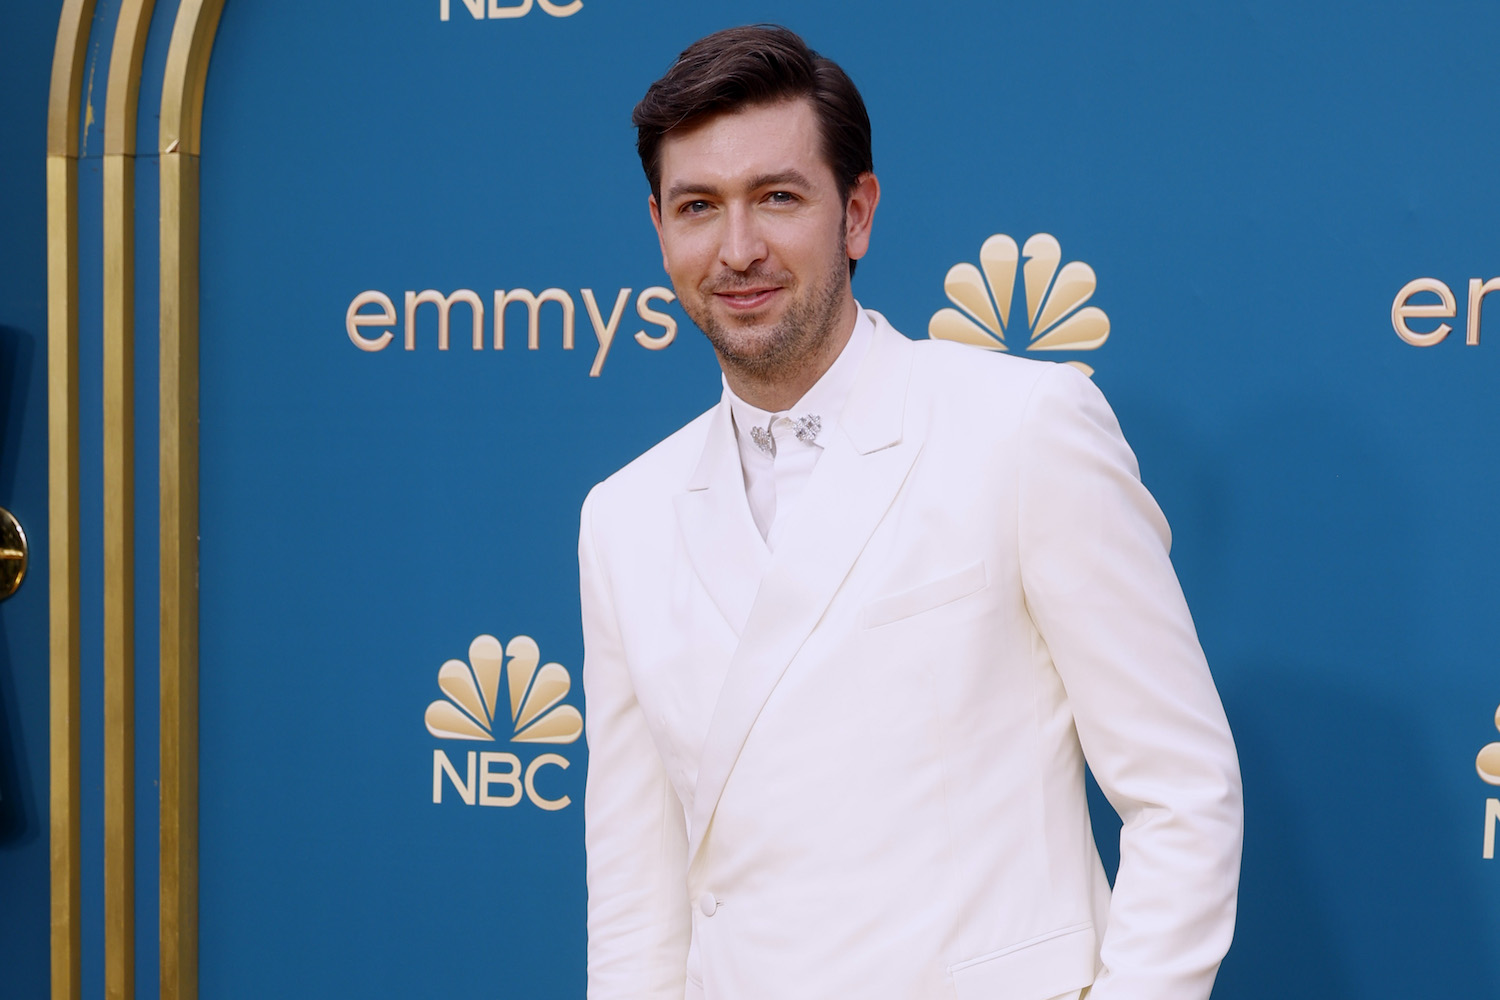 A photo of Nicolas Braun at the 74th Annual Emmy Awards